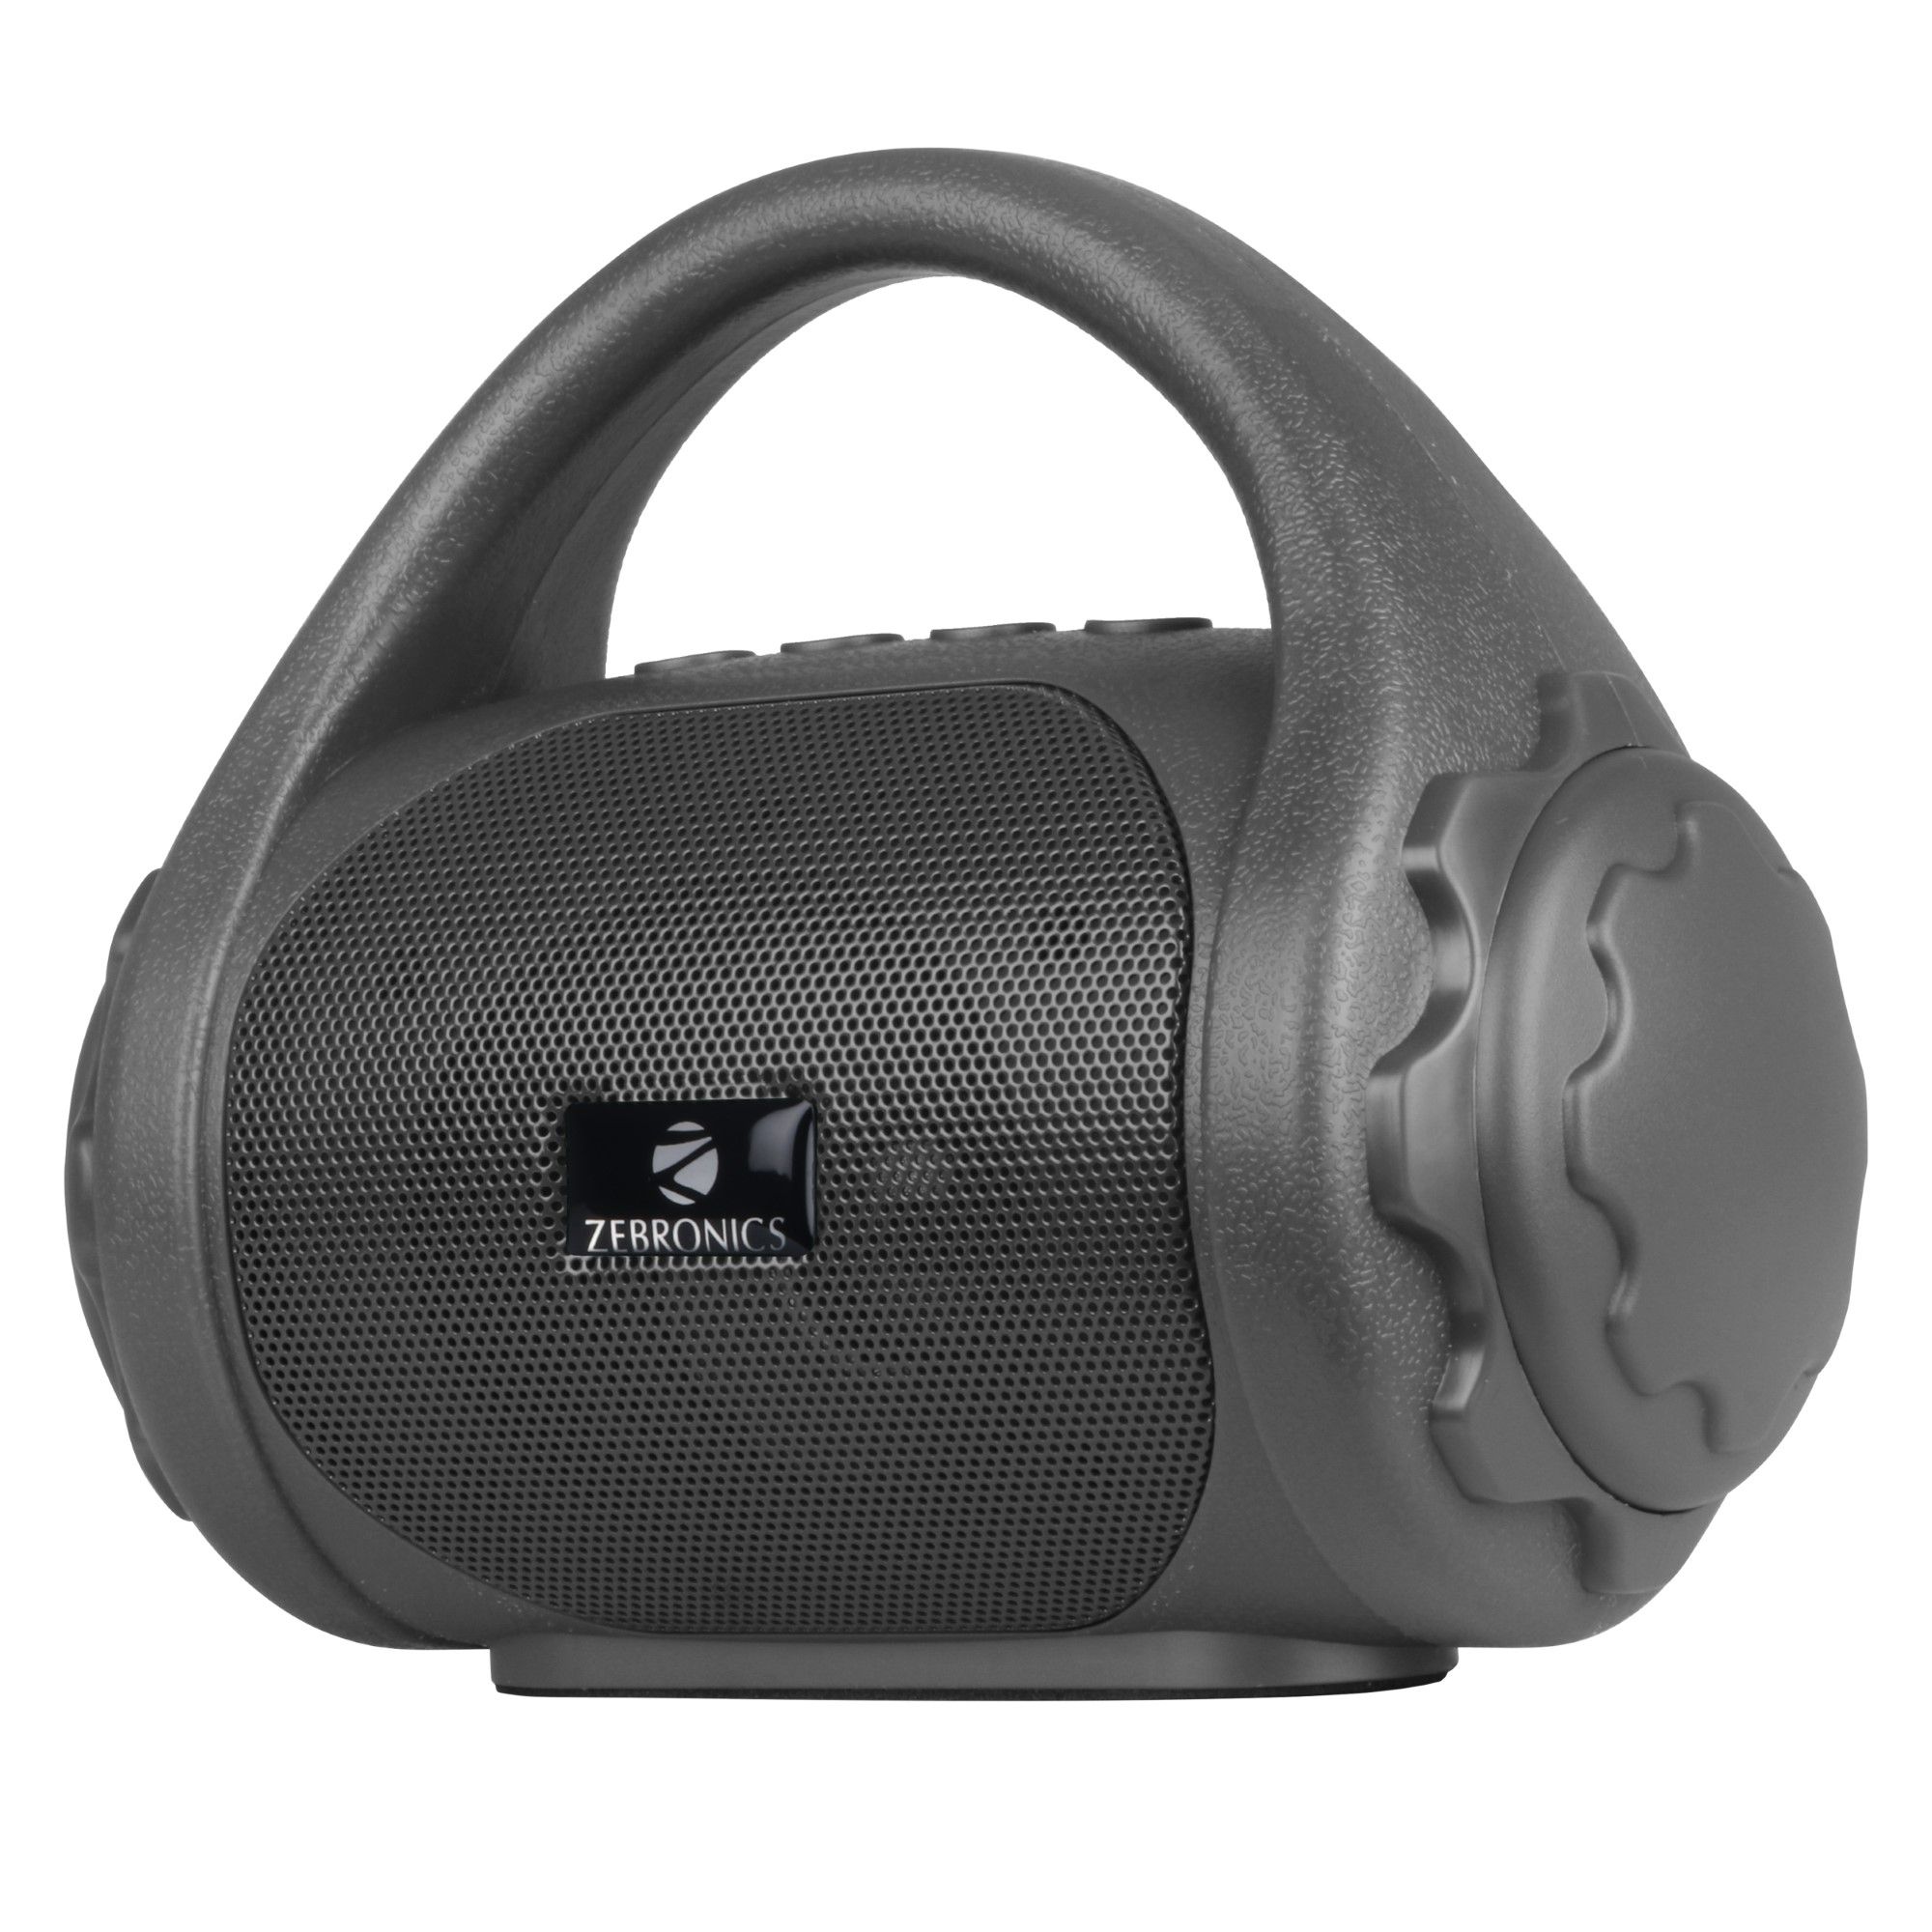 Zebronics Zeb-County Bluetooth Speaker with Built-in FM Radio, Aux Input and Call Function (Gray)